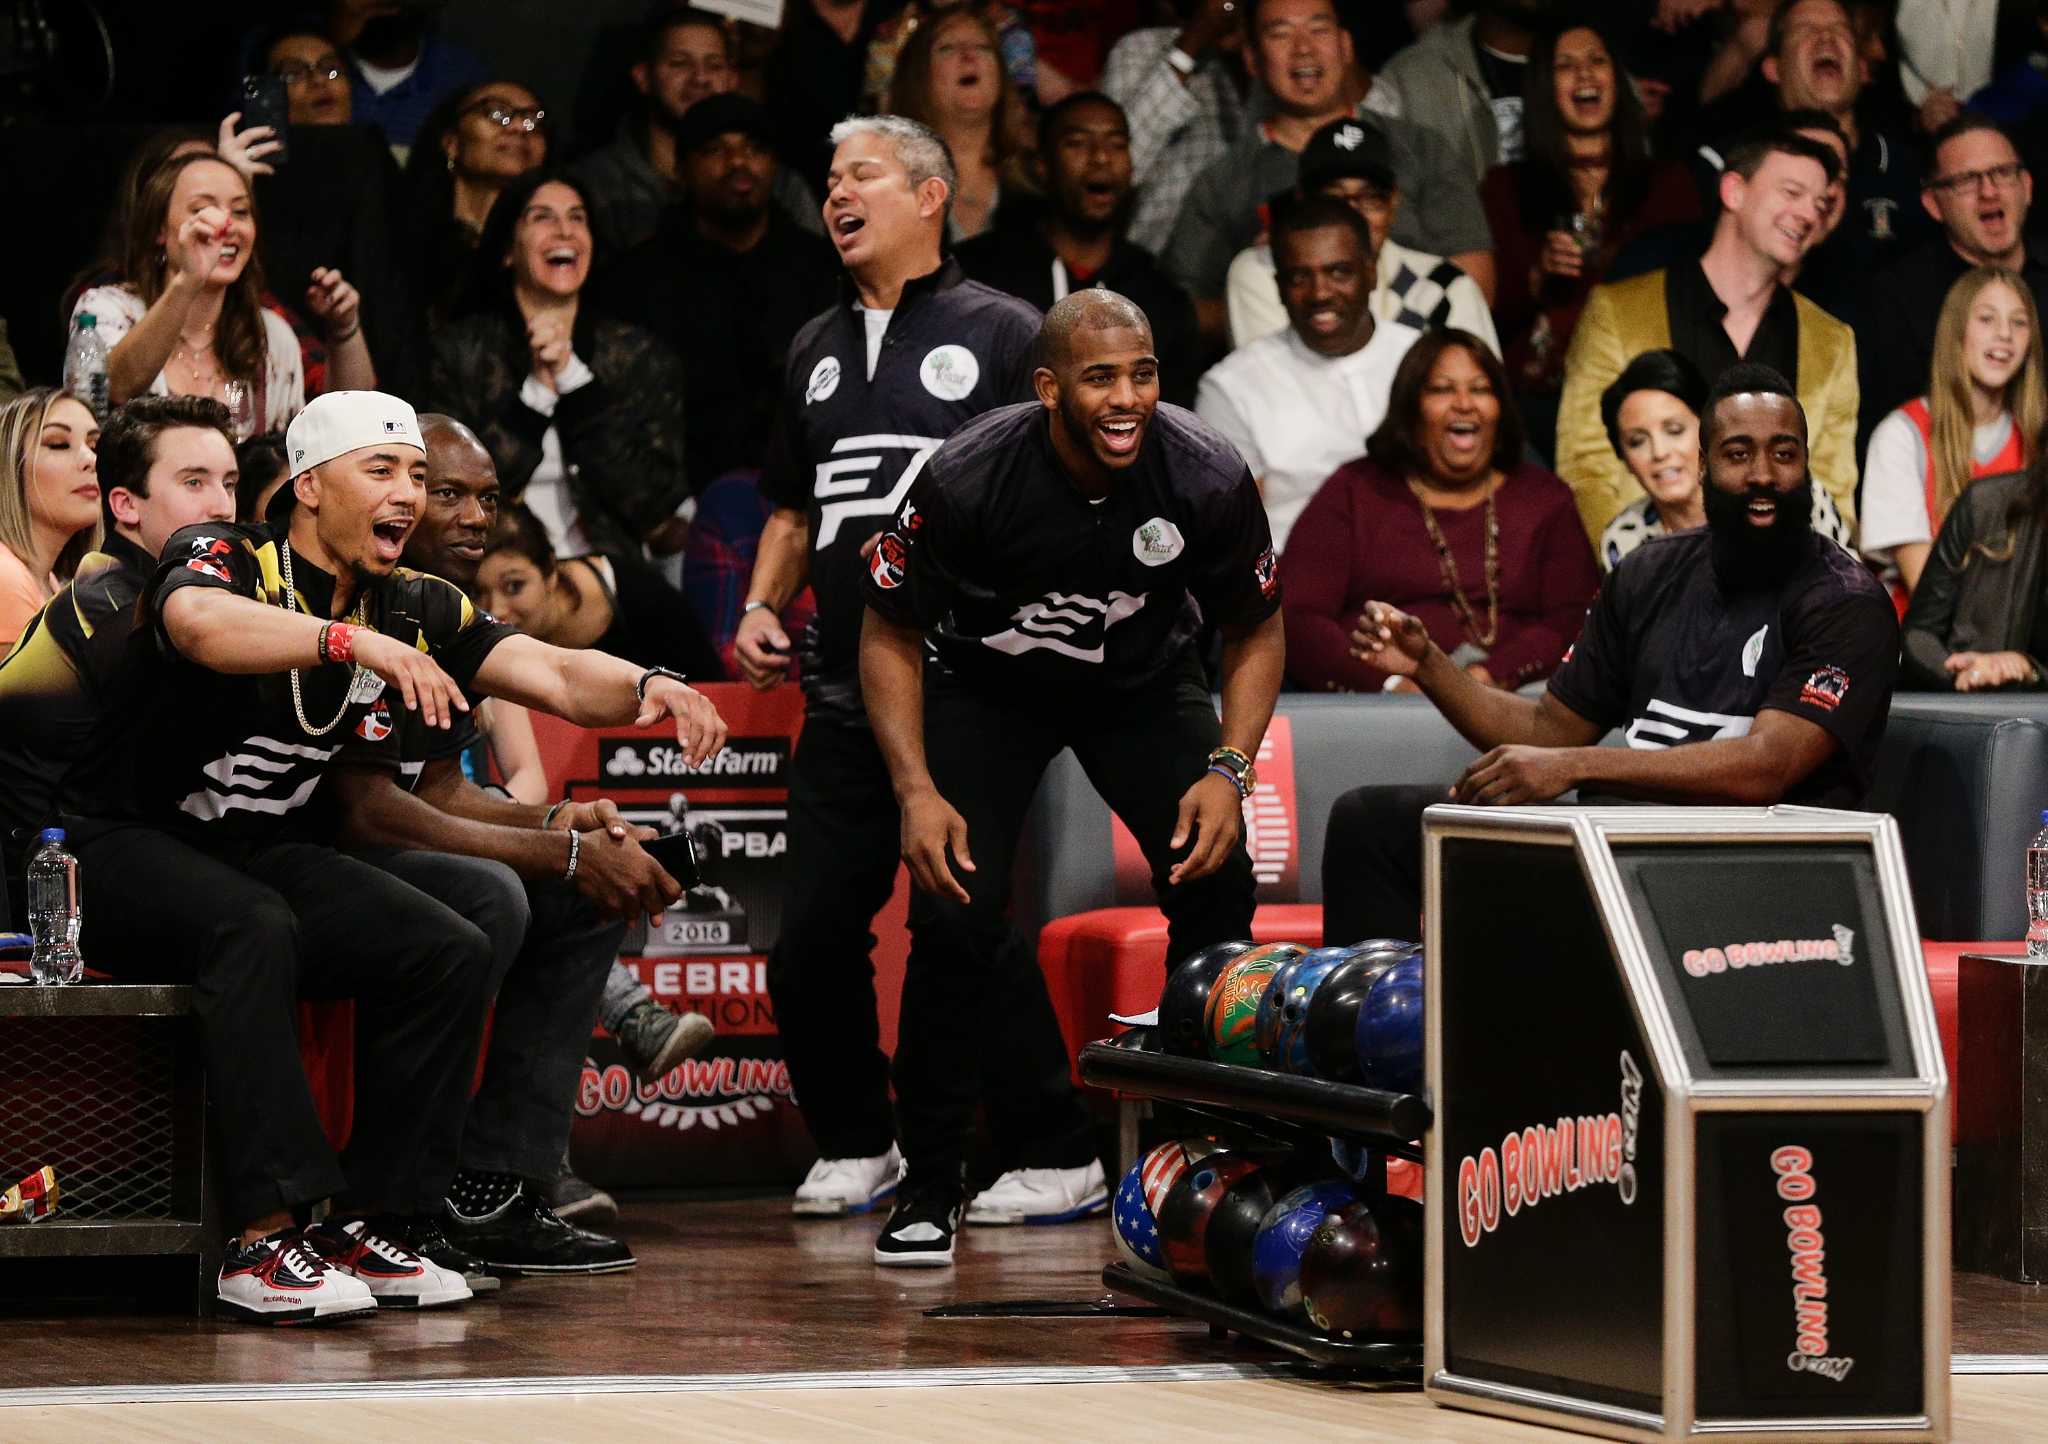 Chris Paul celebrity bowling shows off Rockets' team chemistry